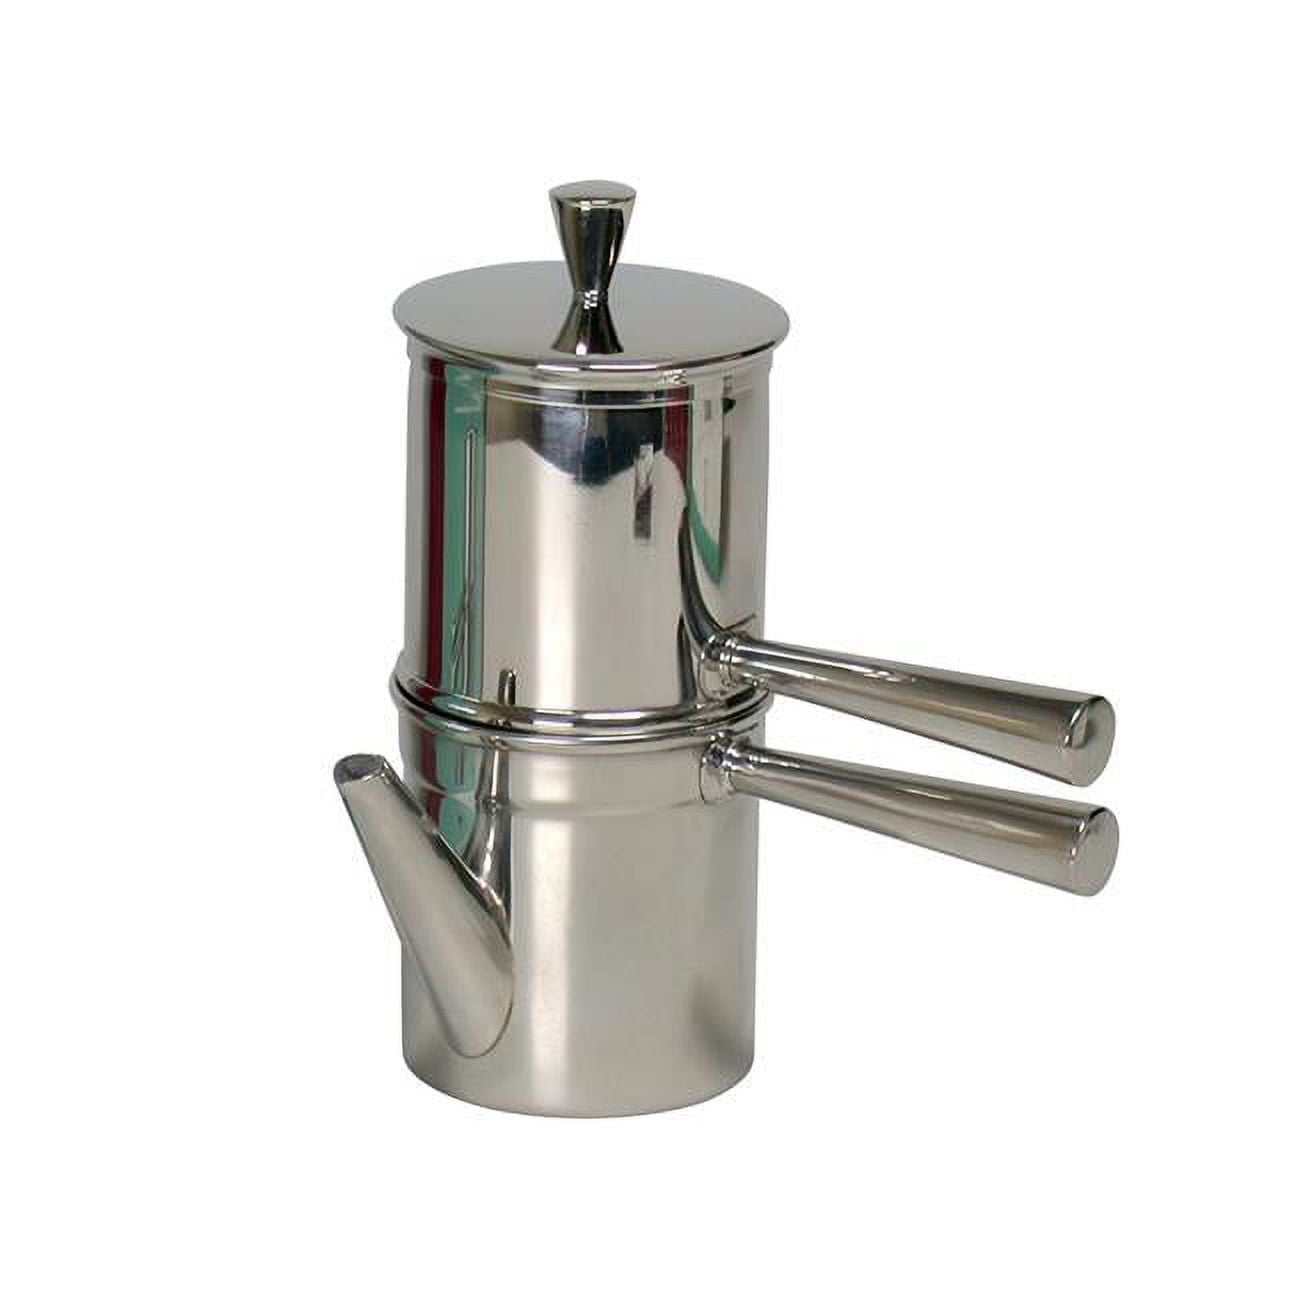 Ilsa V135-6 Neapolitan Coffee Maker Stainless Steel Silver - Cup of 6